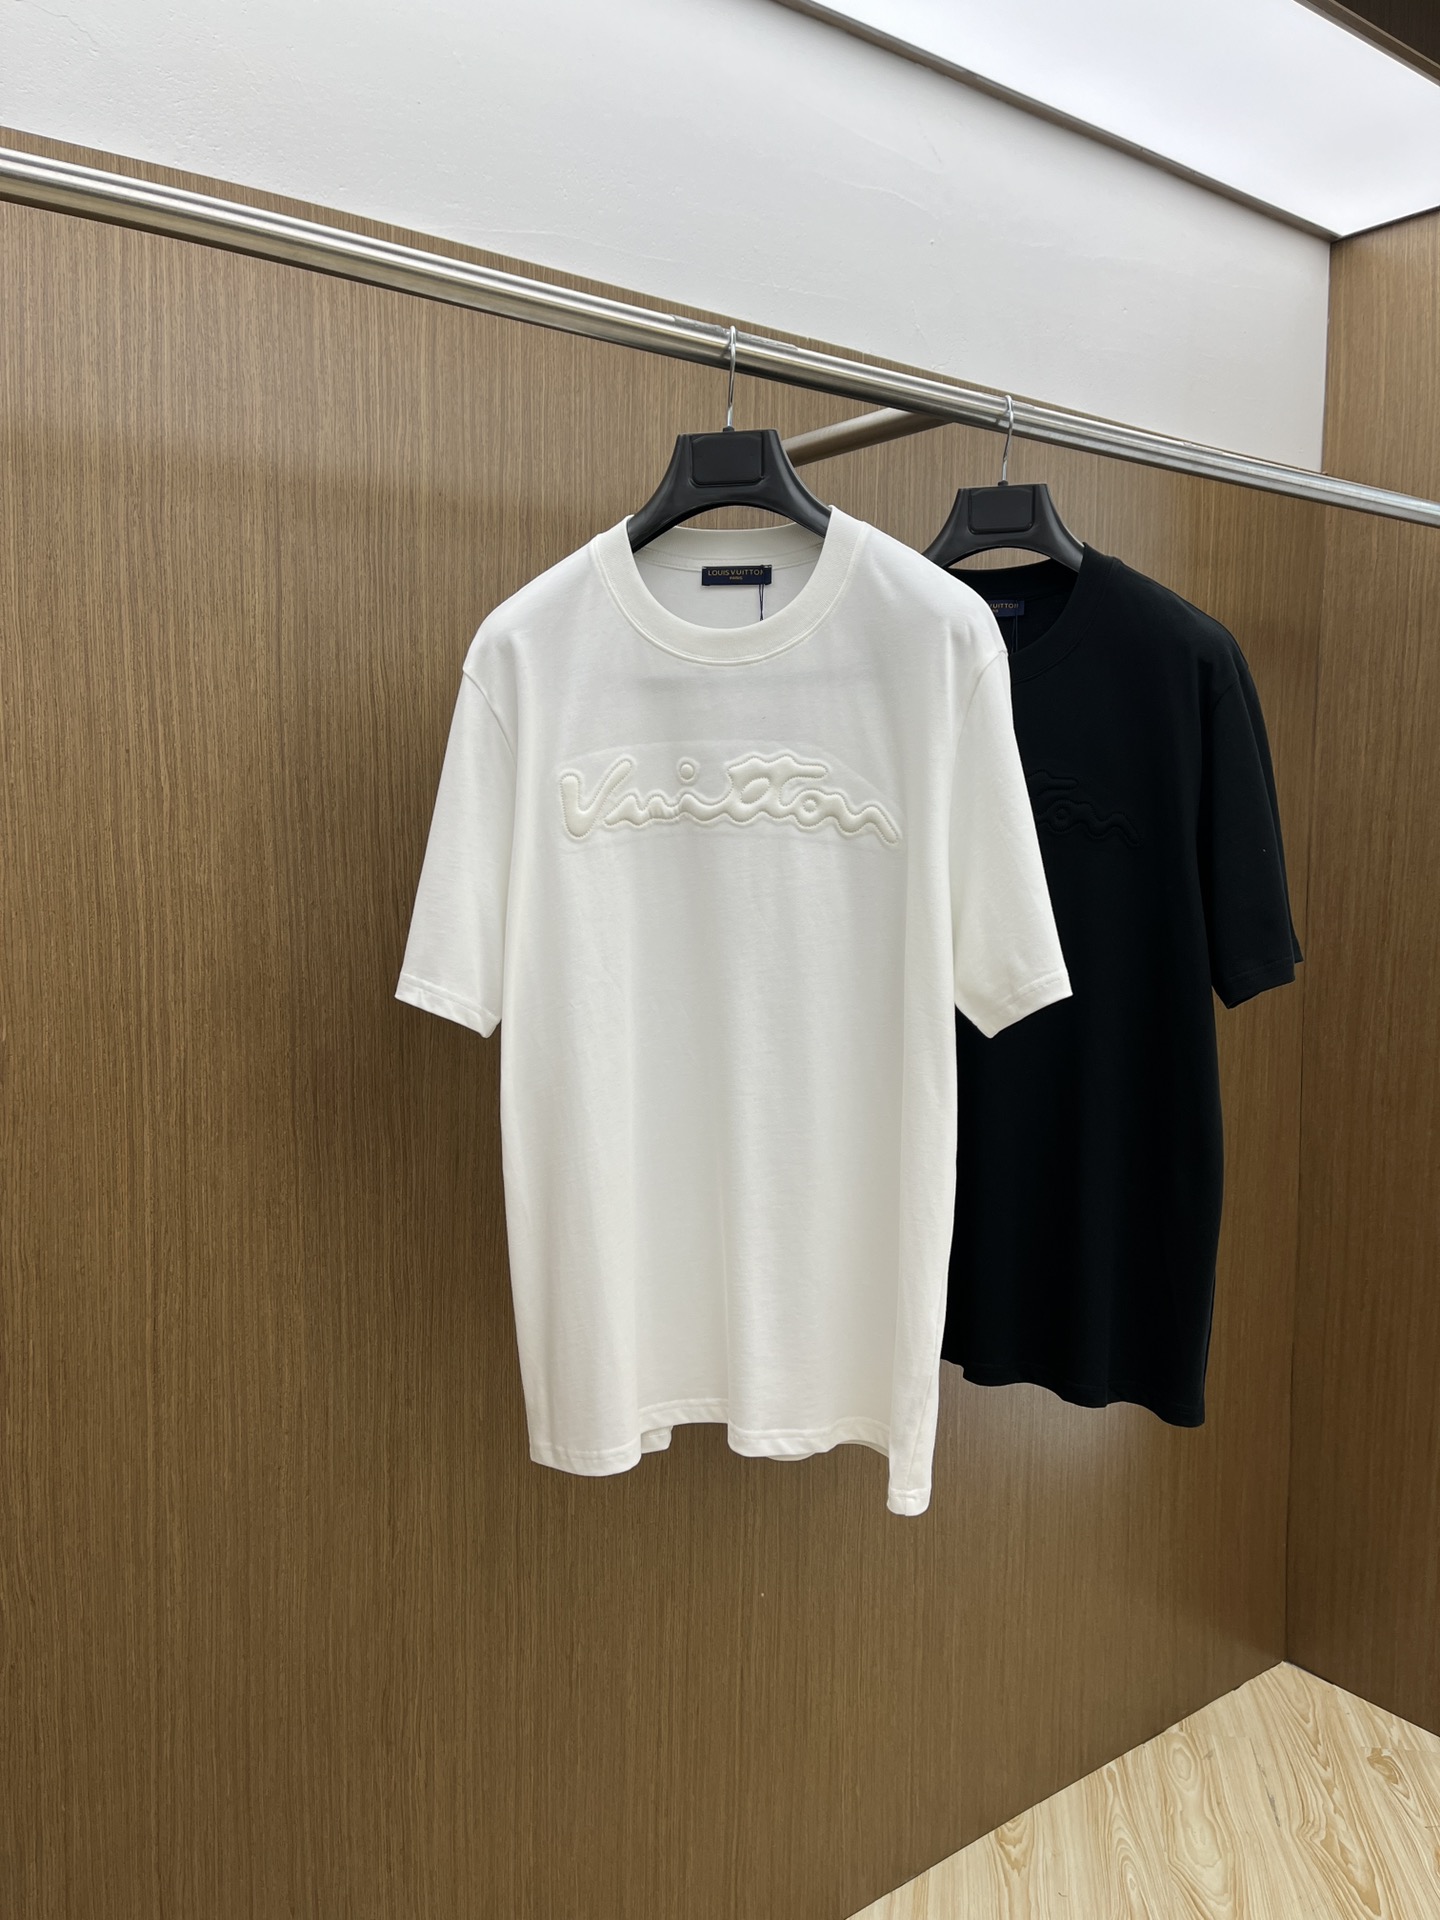 Louis Vuitton Clothing T-Shirt Cotton Mercerized Spring/Summer Collection Fashion Short Sleeve